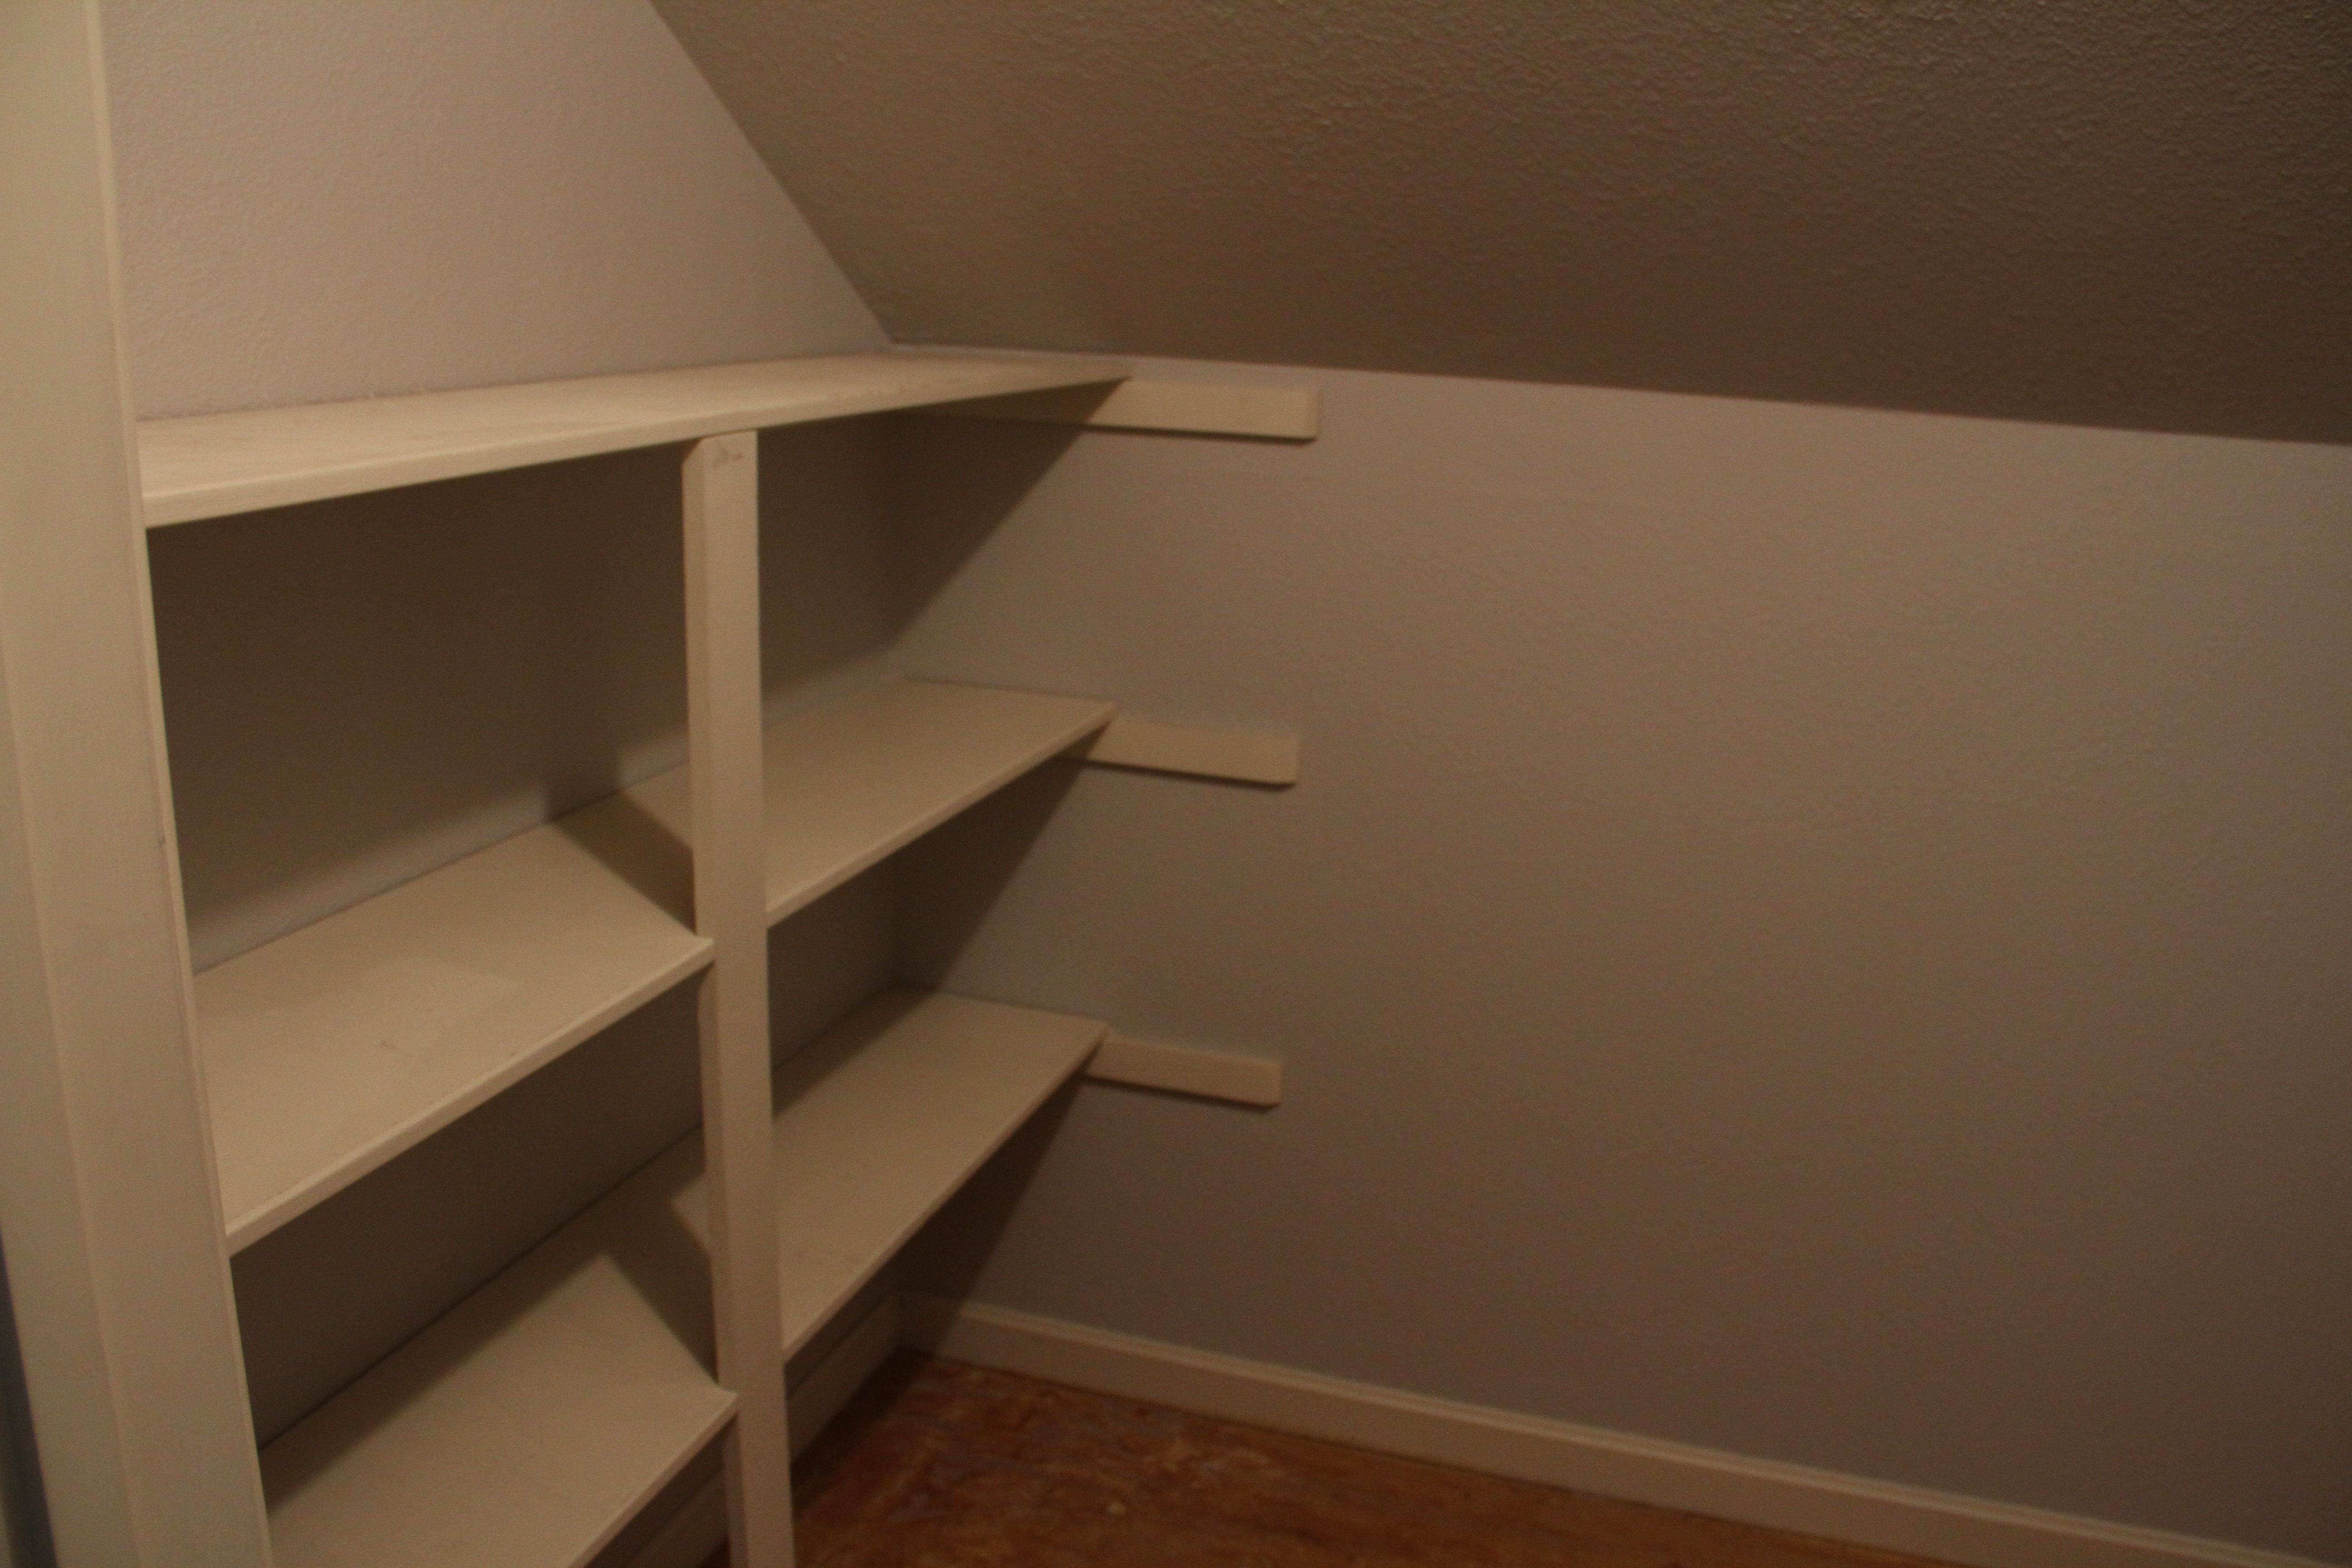 And I even painted the closet. Because it's a walk-in, I thought it should look clean and spruced up.